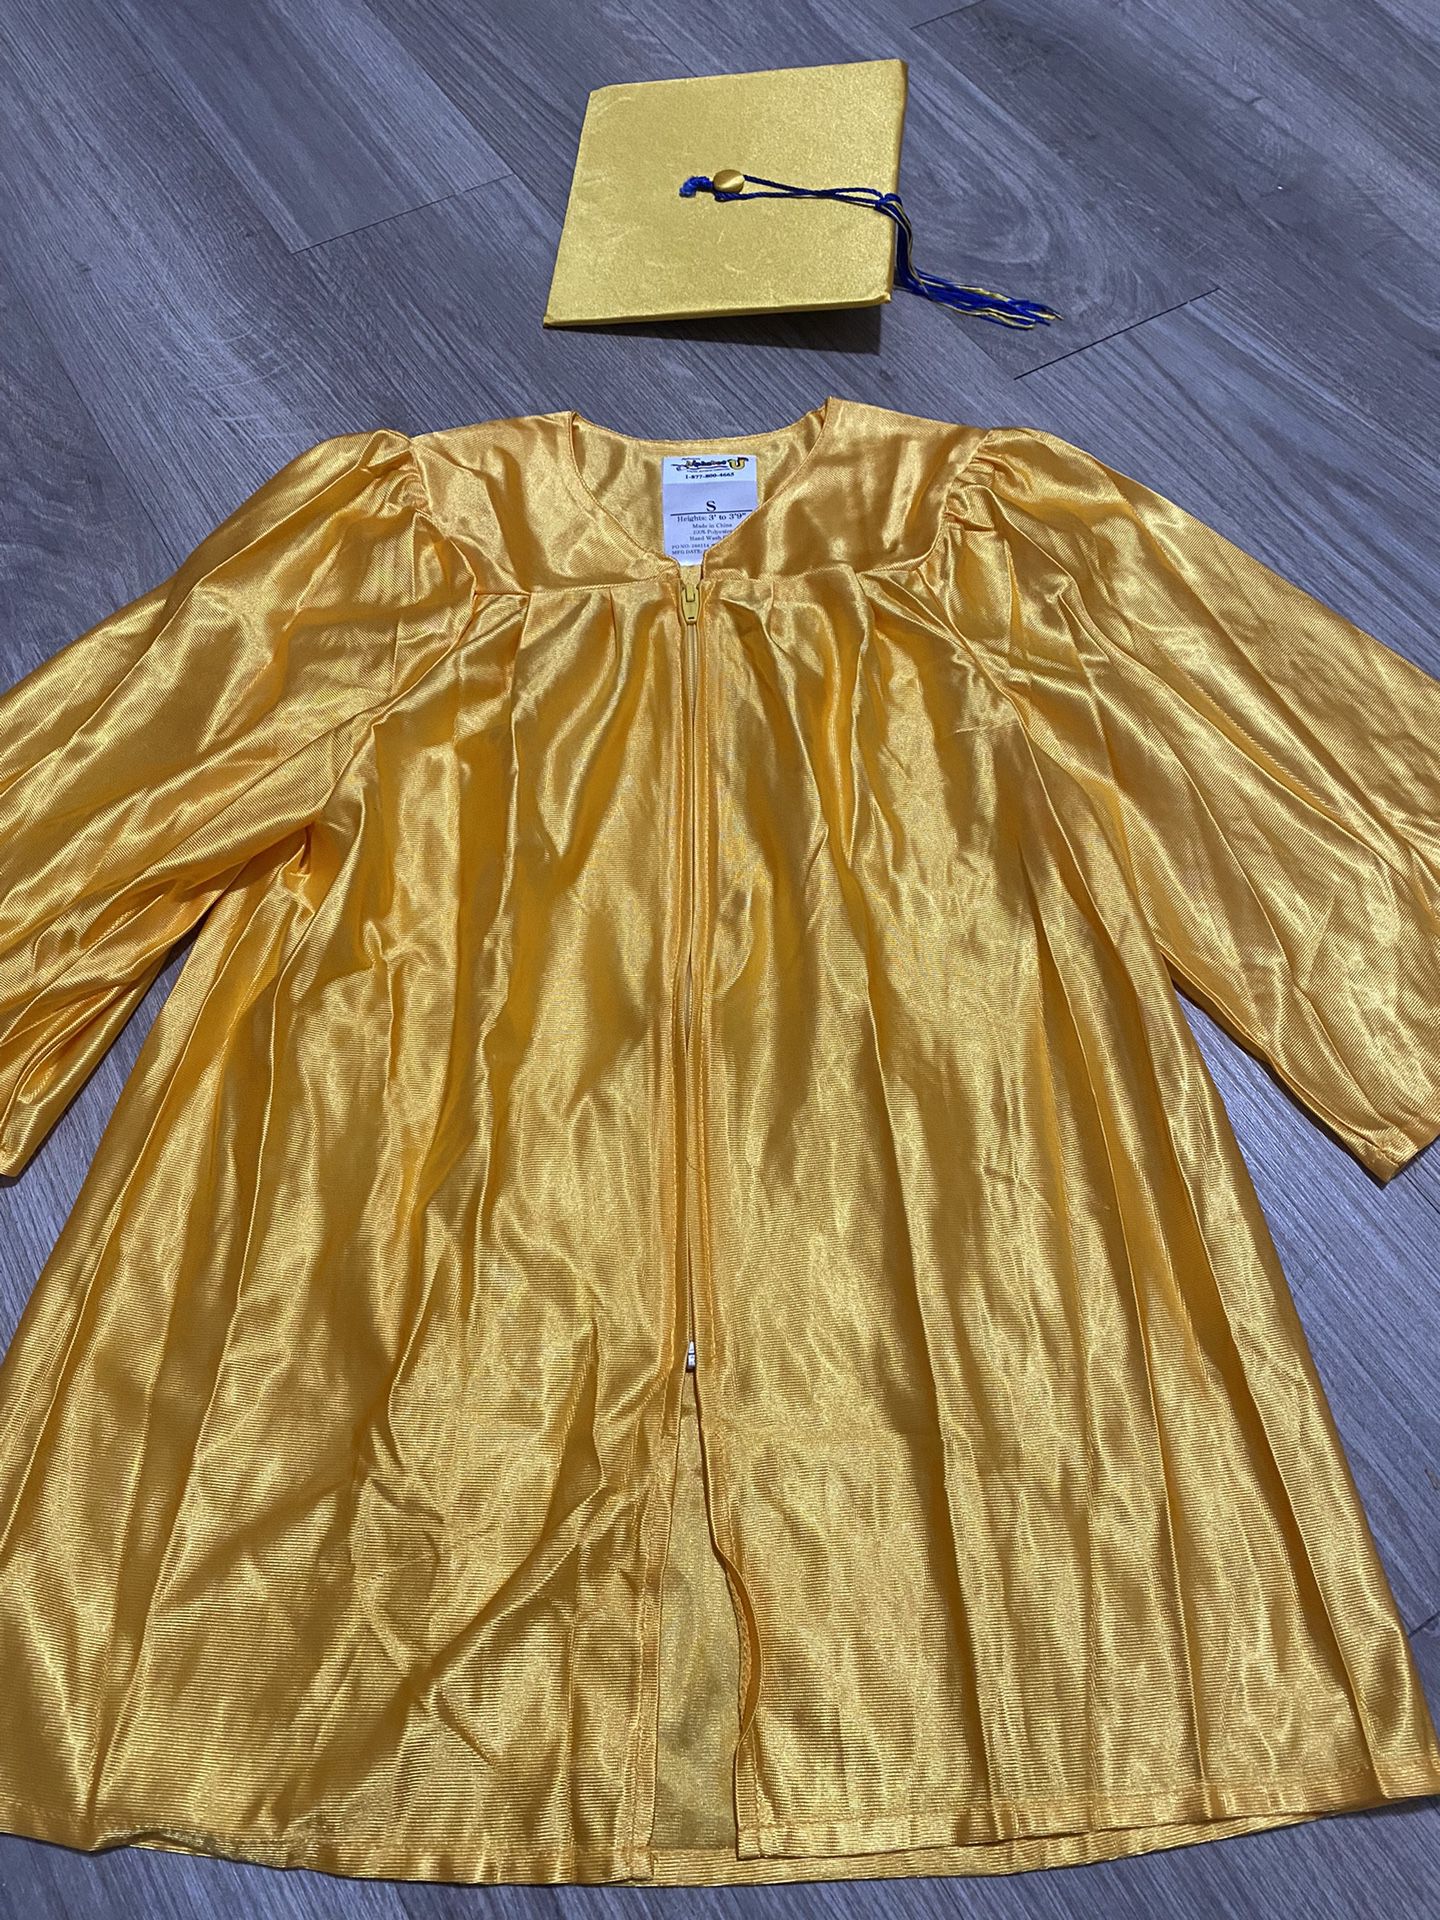 Yellow kid Size graduation gown